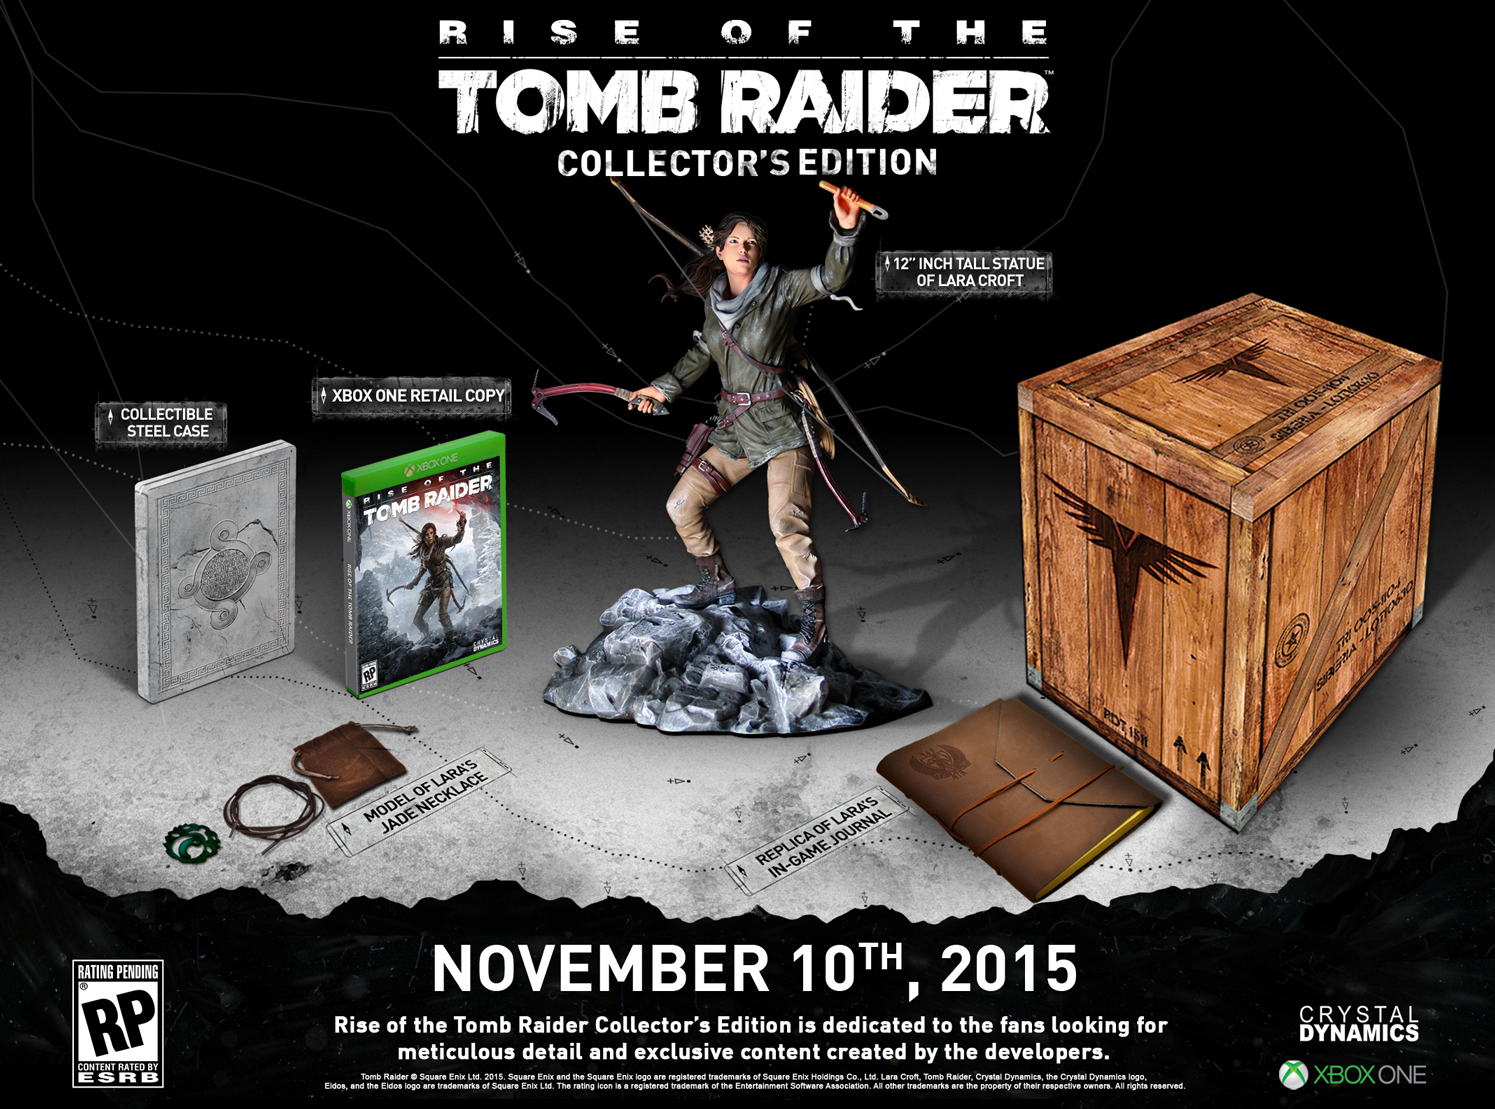 Rise of the Tomb Raider Collector's Edition contents statue